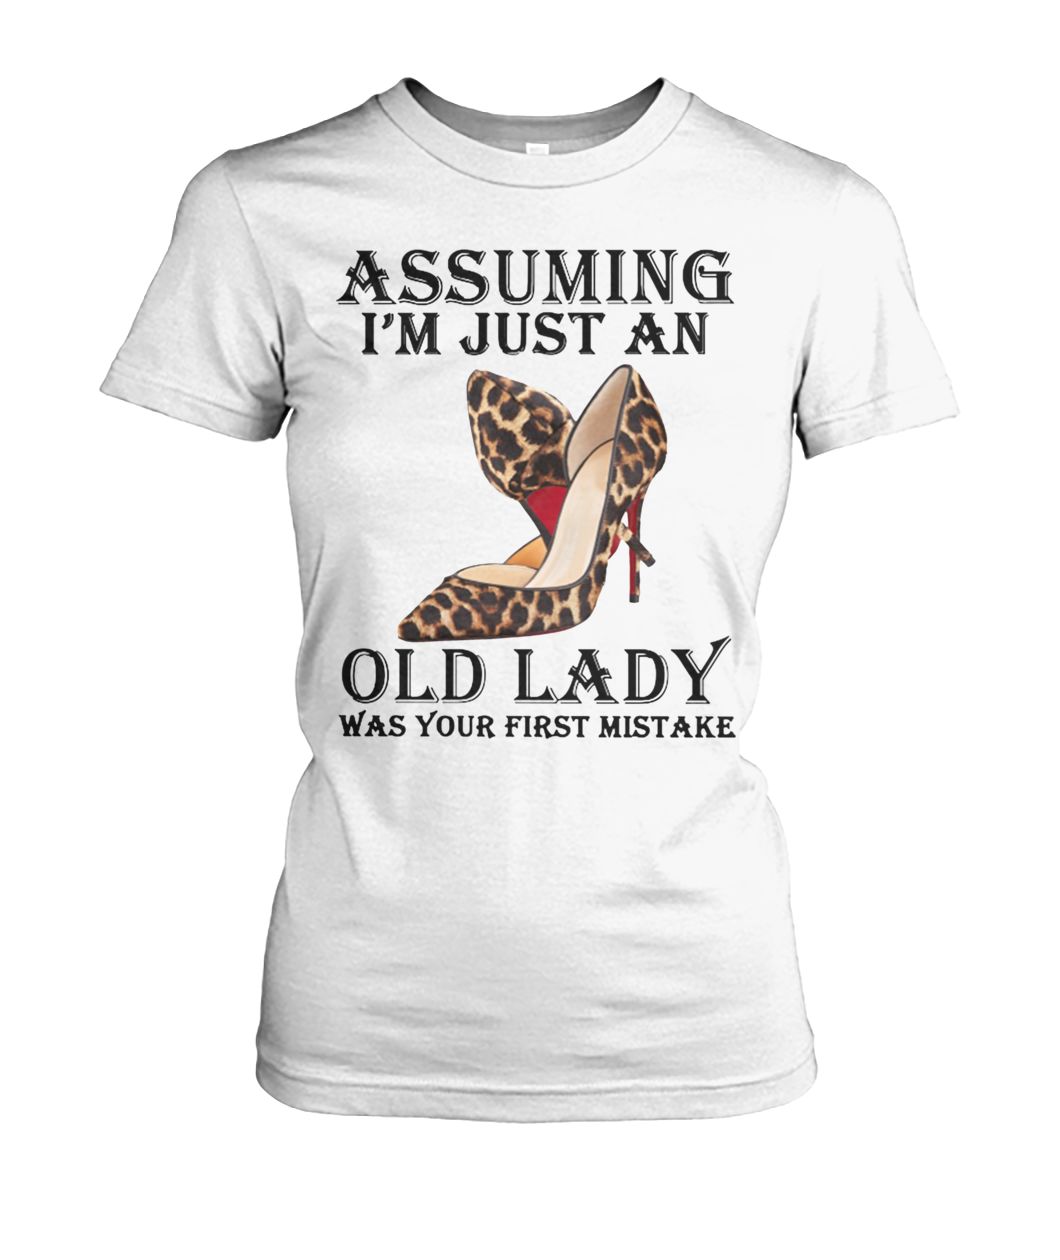 High heels assuming I'm just an old lady was your first mistake women's crew tee